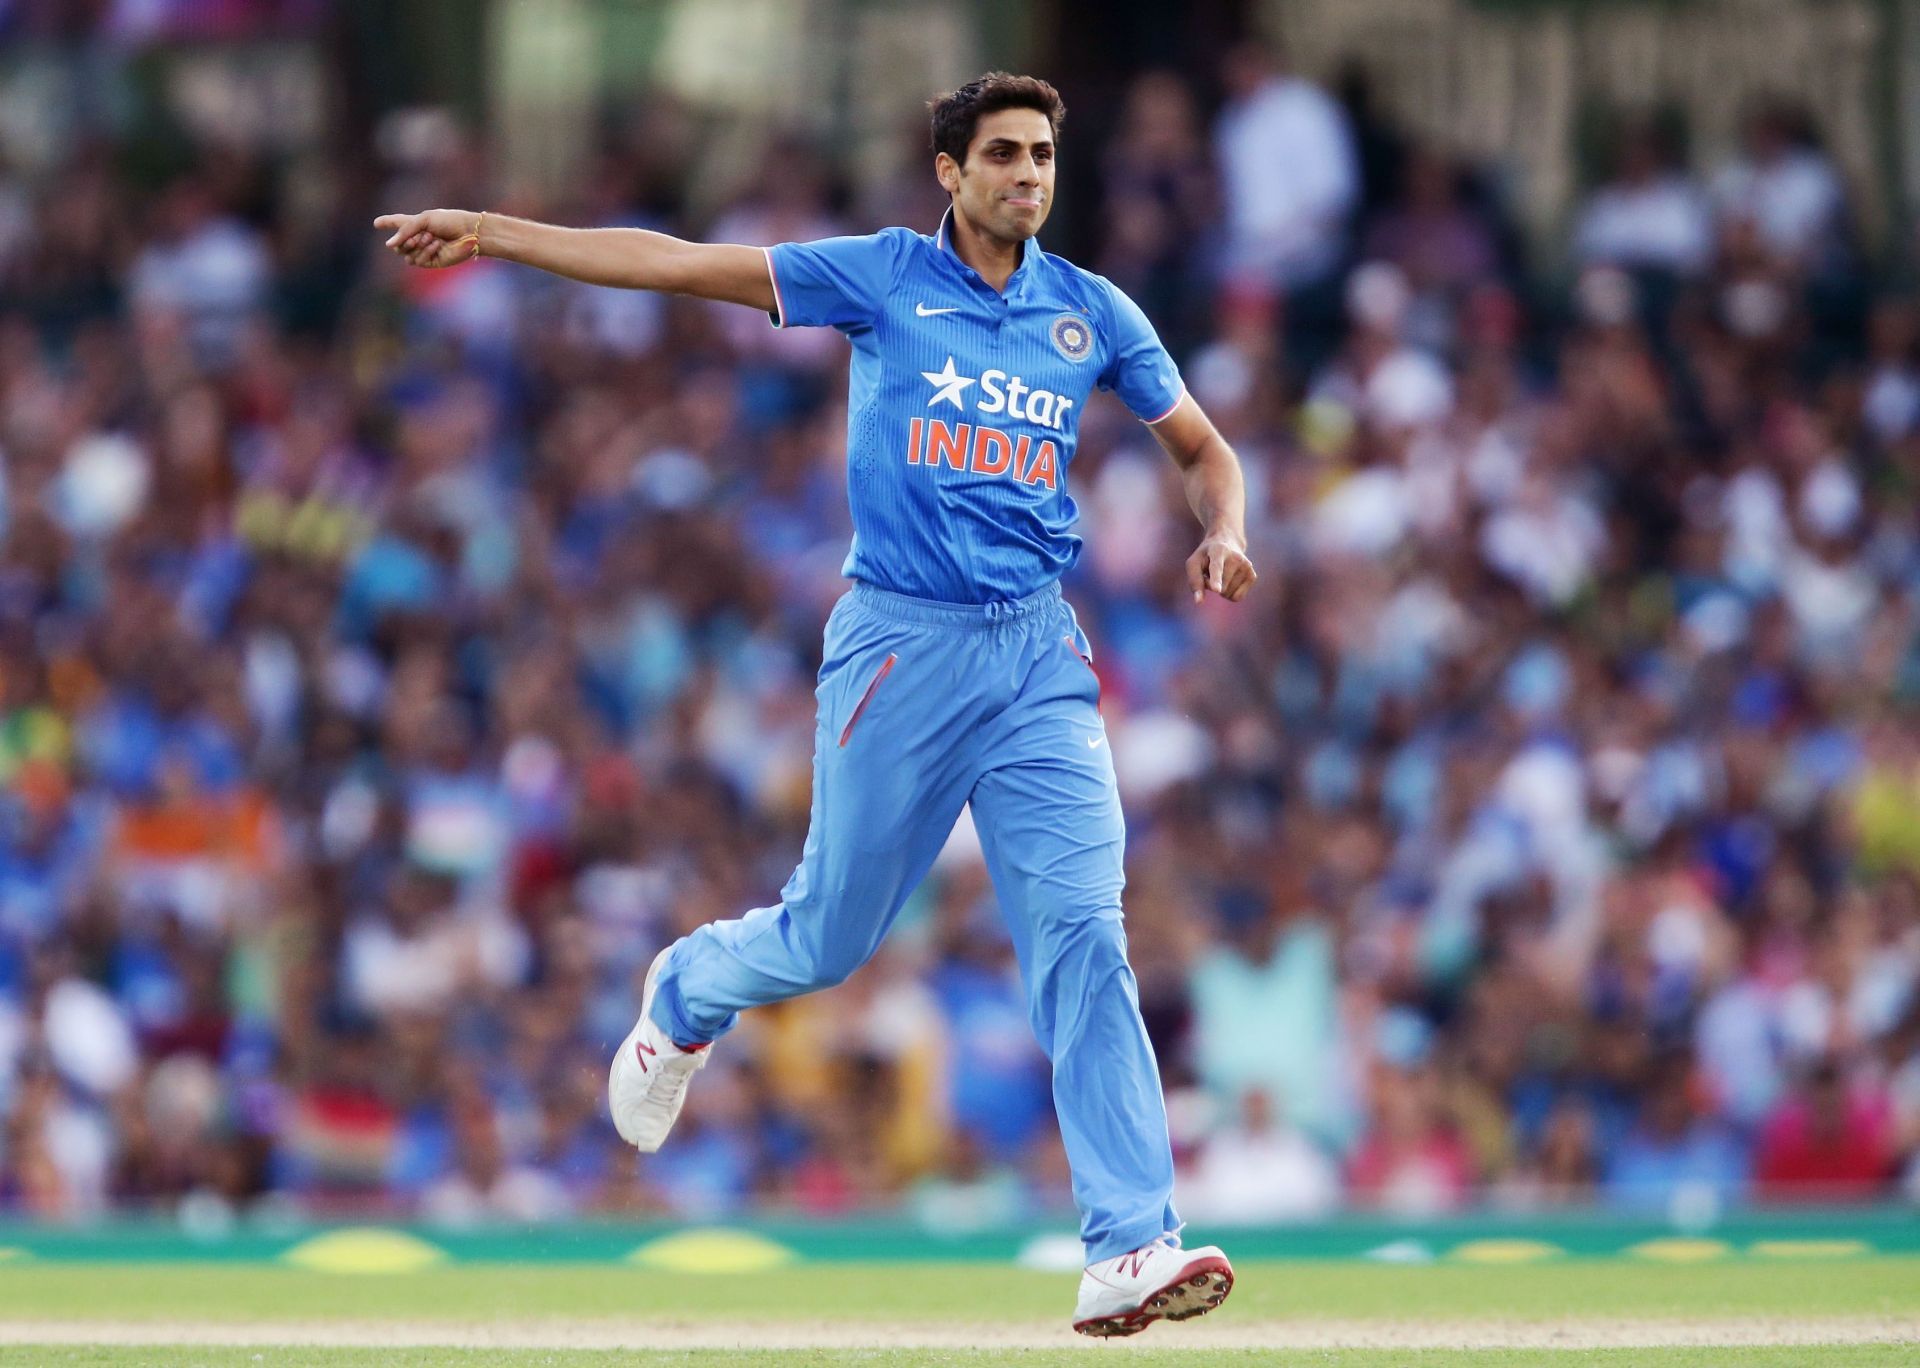 Ashish Nehra made his T20I debut in 2009 (Image: Getty)